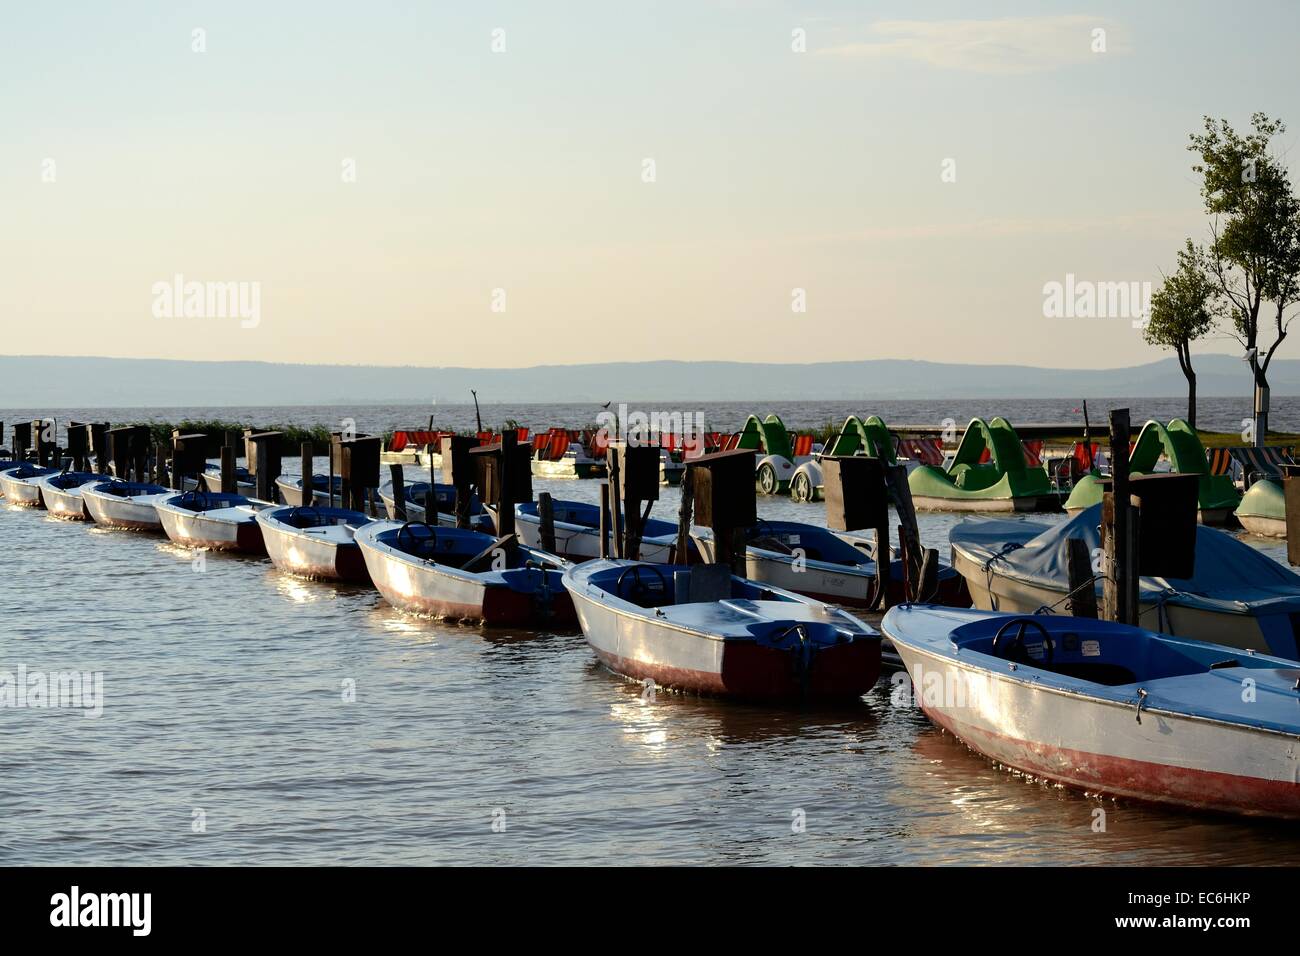 On the web-based motorboats and pedalos Stock Photo